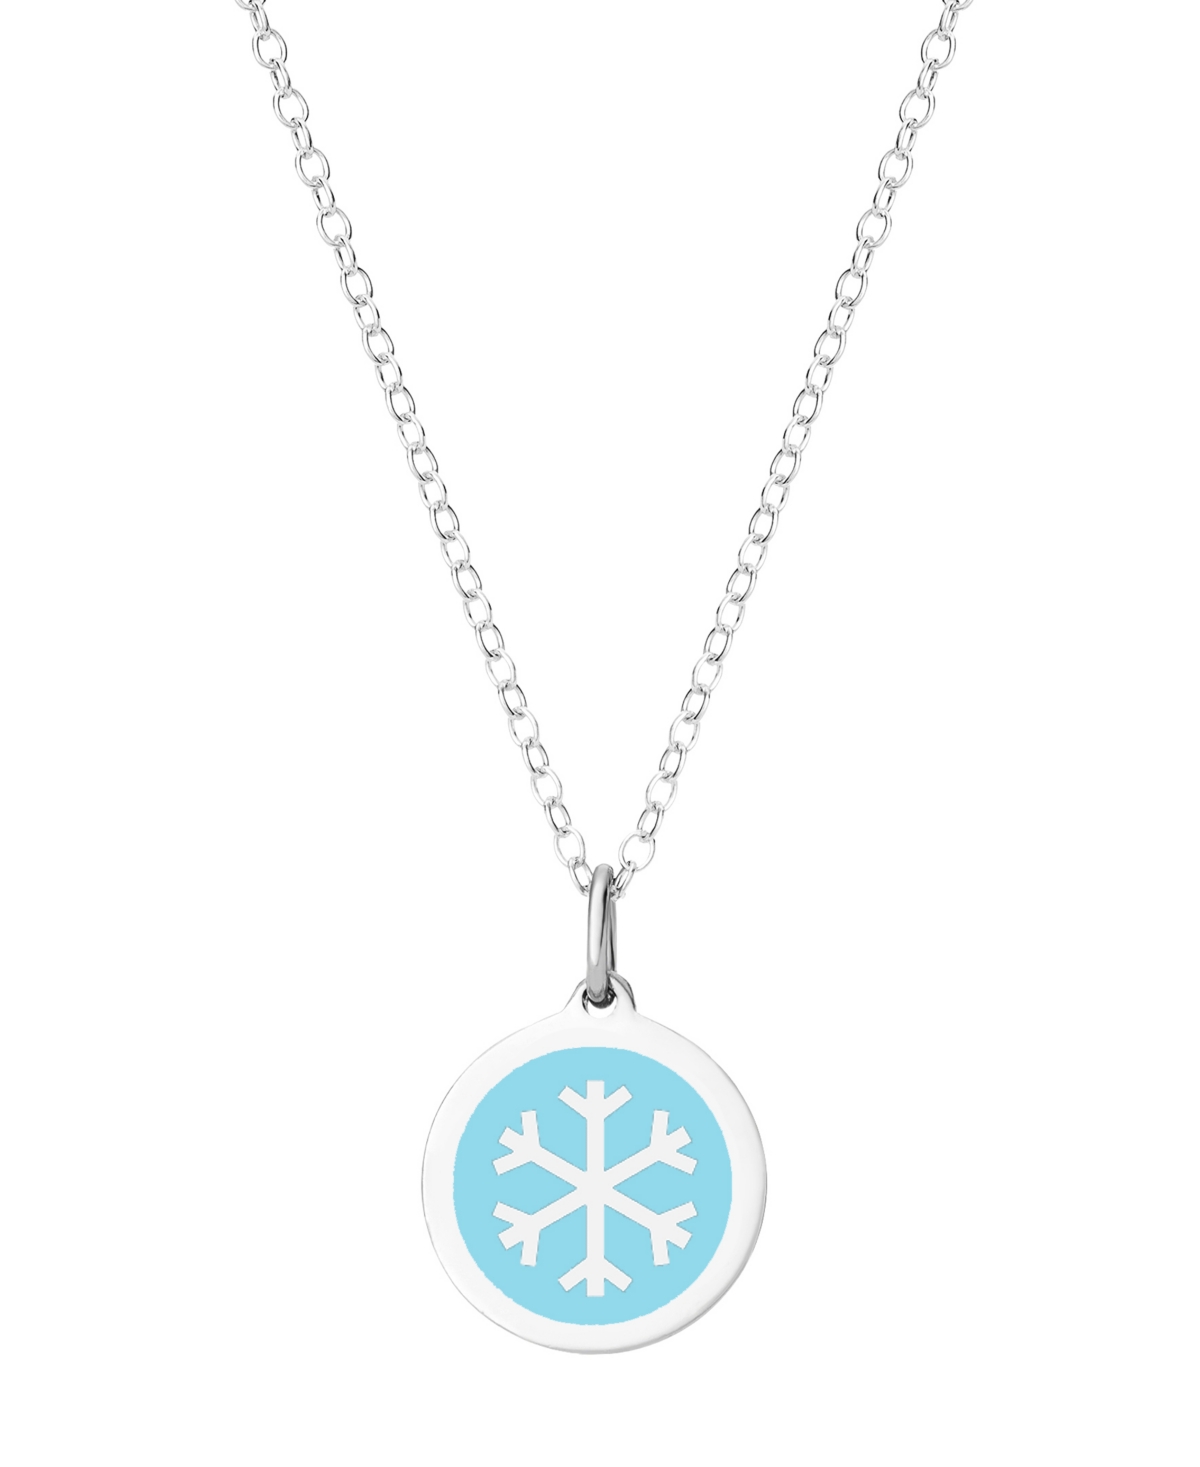 Mini Snowflake Necklace in Sterling Silver - Lgtblue